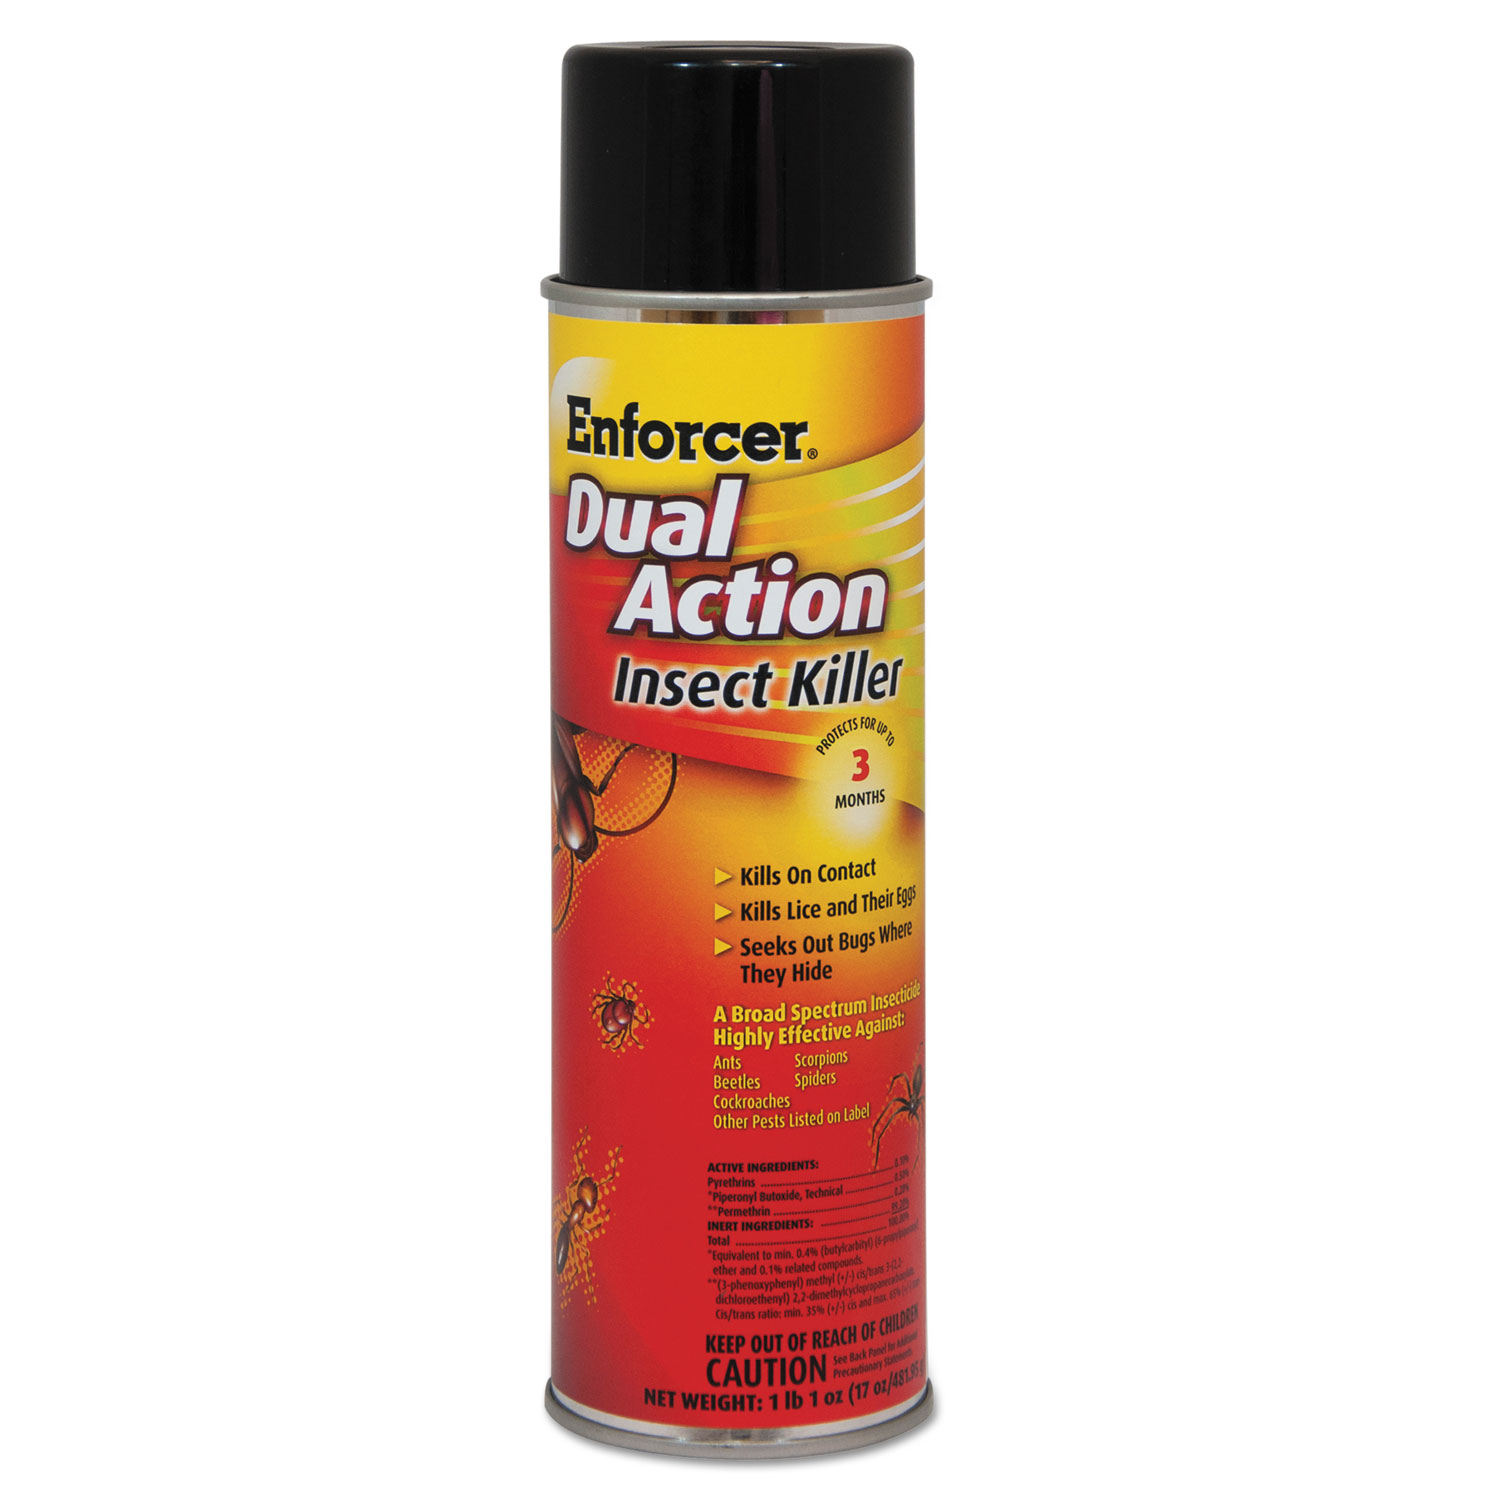  Enforcer 1047651 Dual Action Insect Killer, For Flying/Crawling Insects, 17oz Aerosol,12/Carton (AMR1047651) 